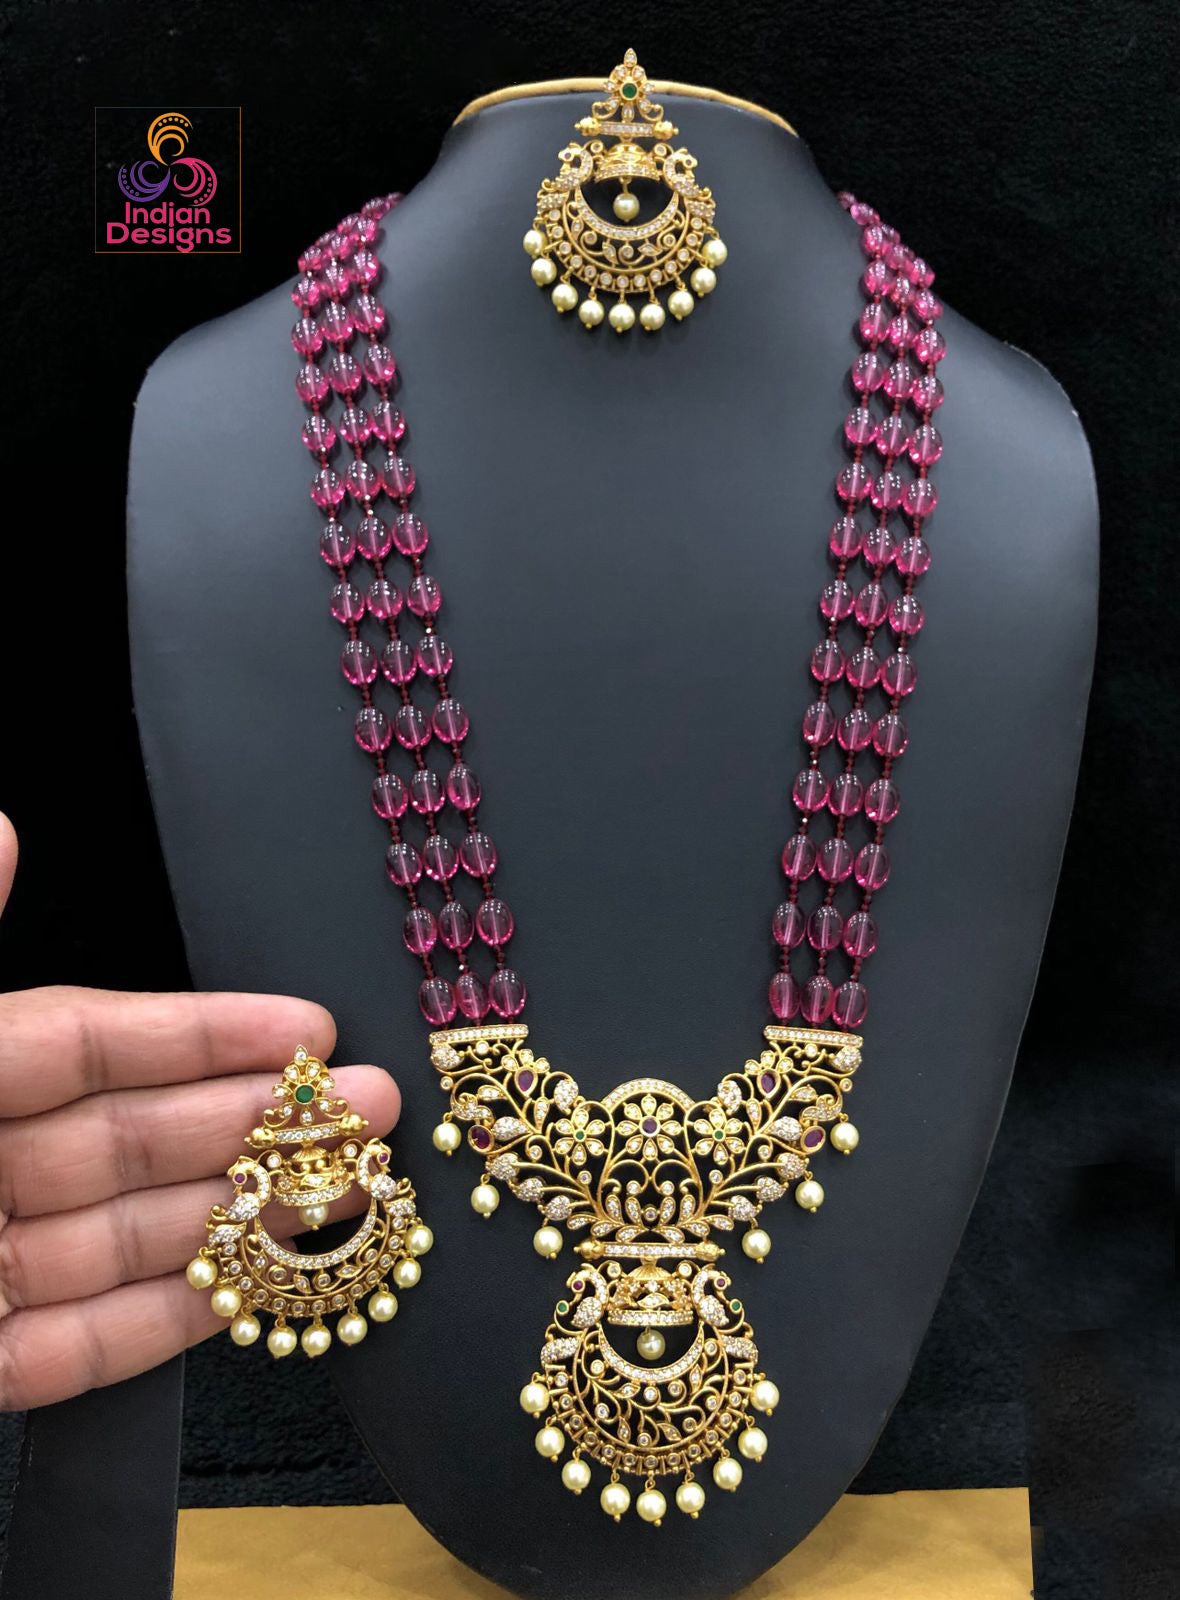 Designer Indian Mangalsutra Indian Jwellery for Women and Girl. - Etsy |  Black bead necklace, Gold fashion necklace, Black beaded jewelry